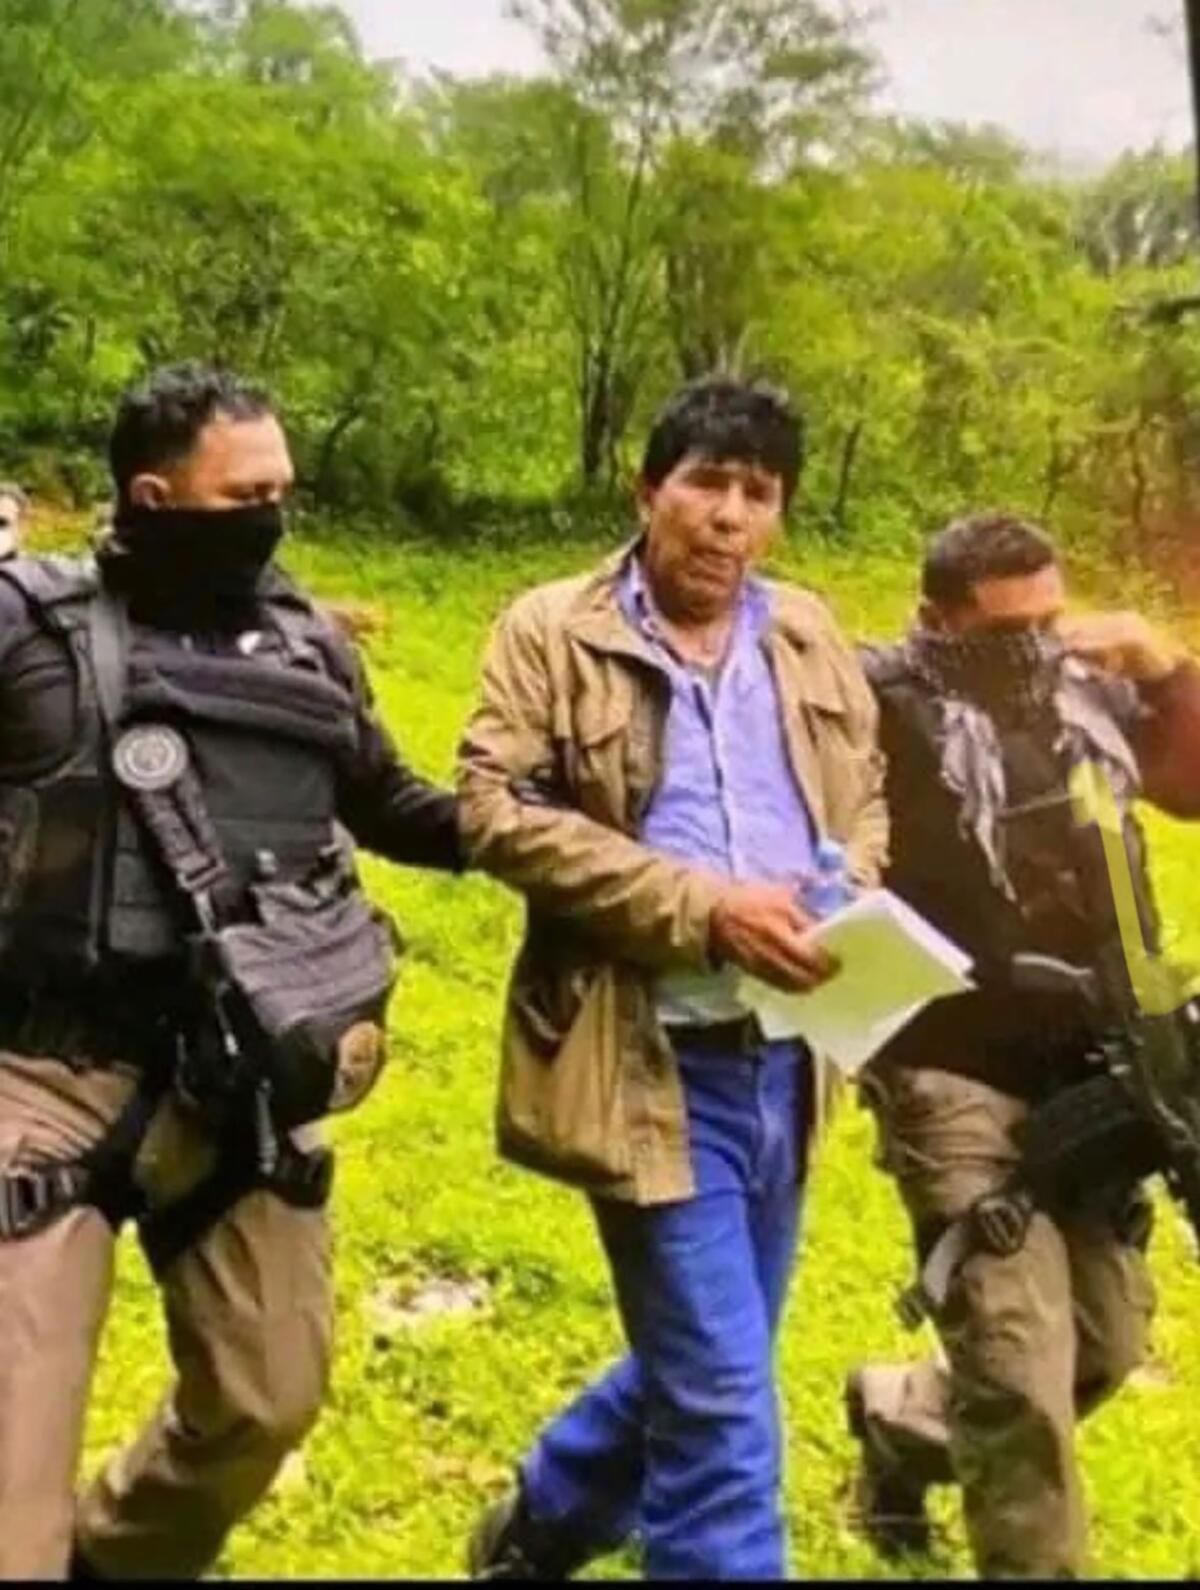 In this government handout photo provided by Mexico's Secretariat of the Navy, agents escort drug trafficker Rafael Caro Quintero, in Sinaloa state, Mexico, Friday, July 15, 2022, captured deep in the mountains of his home state. It was a 6-year-old bloodhound named “Max” who rousted Caro Quintero from the undergrowth. (Mexico's Secretariat of the Navy via AP)